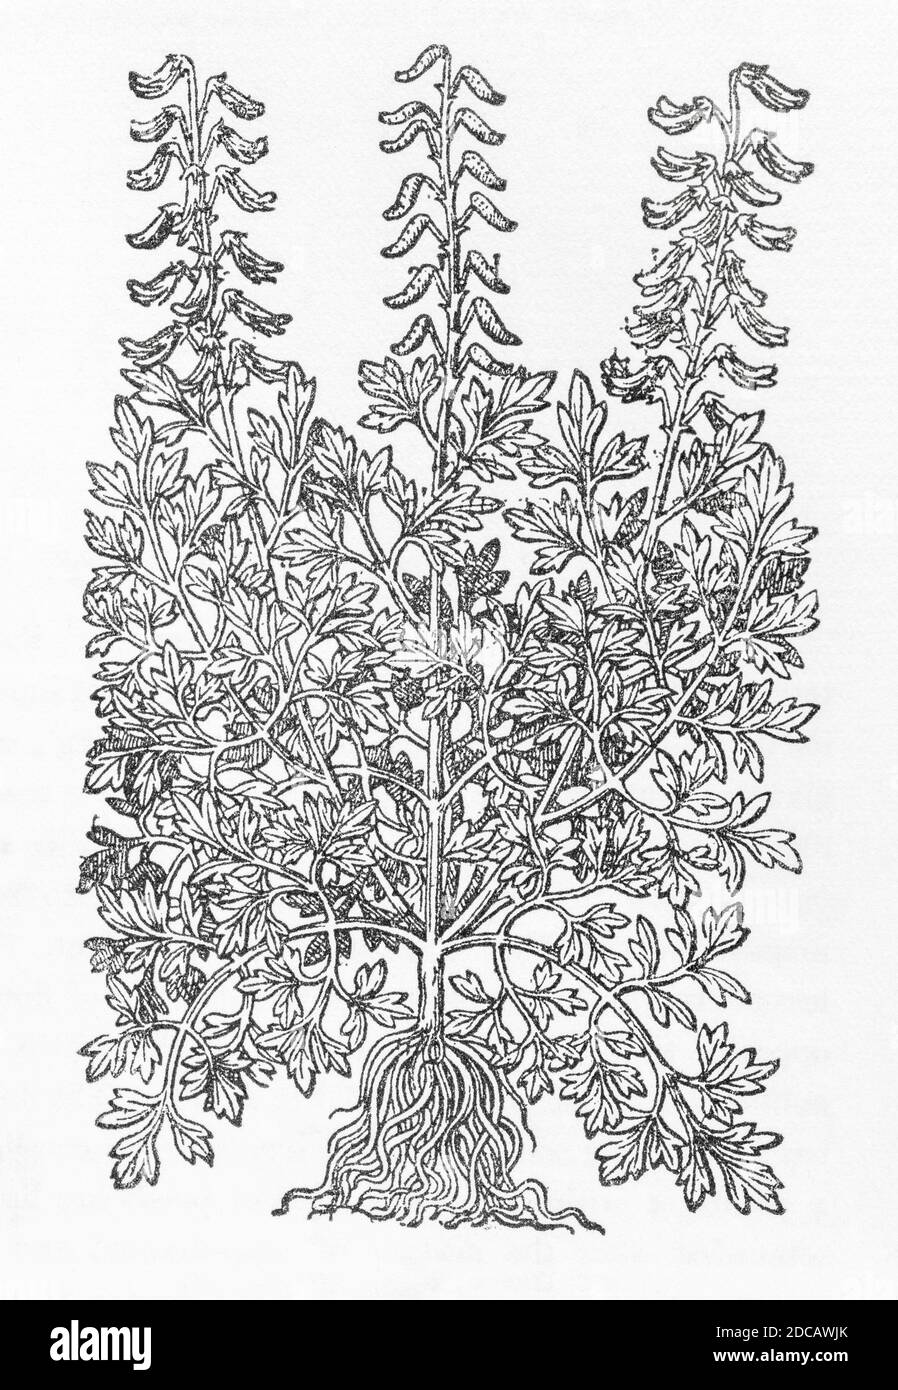 Ramping Fumitory / Fumaria capreolata woodcut from Gerarde's Herball, History of Plants. He refers to it as 'Yellow Fumitorie' / Fumaria lutea. P928 Stock Photo